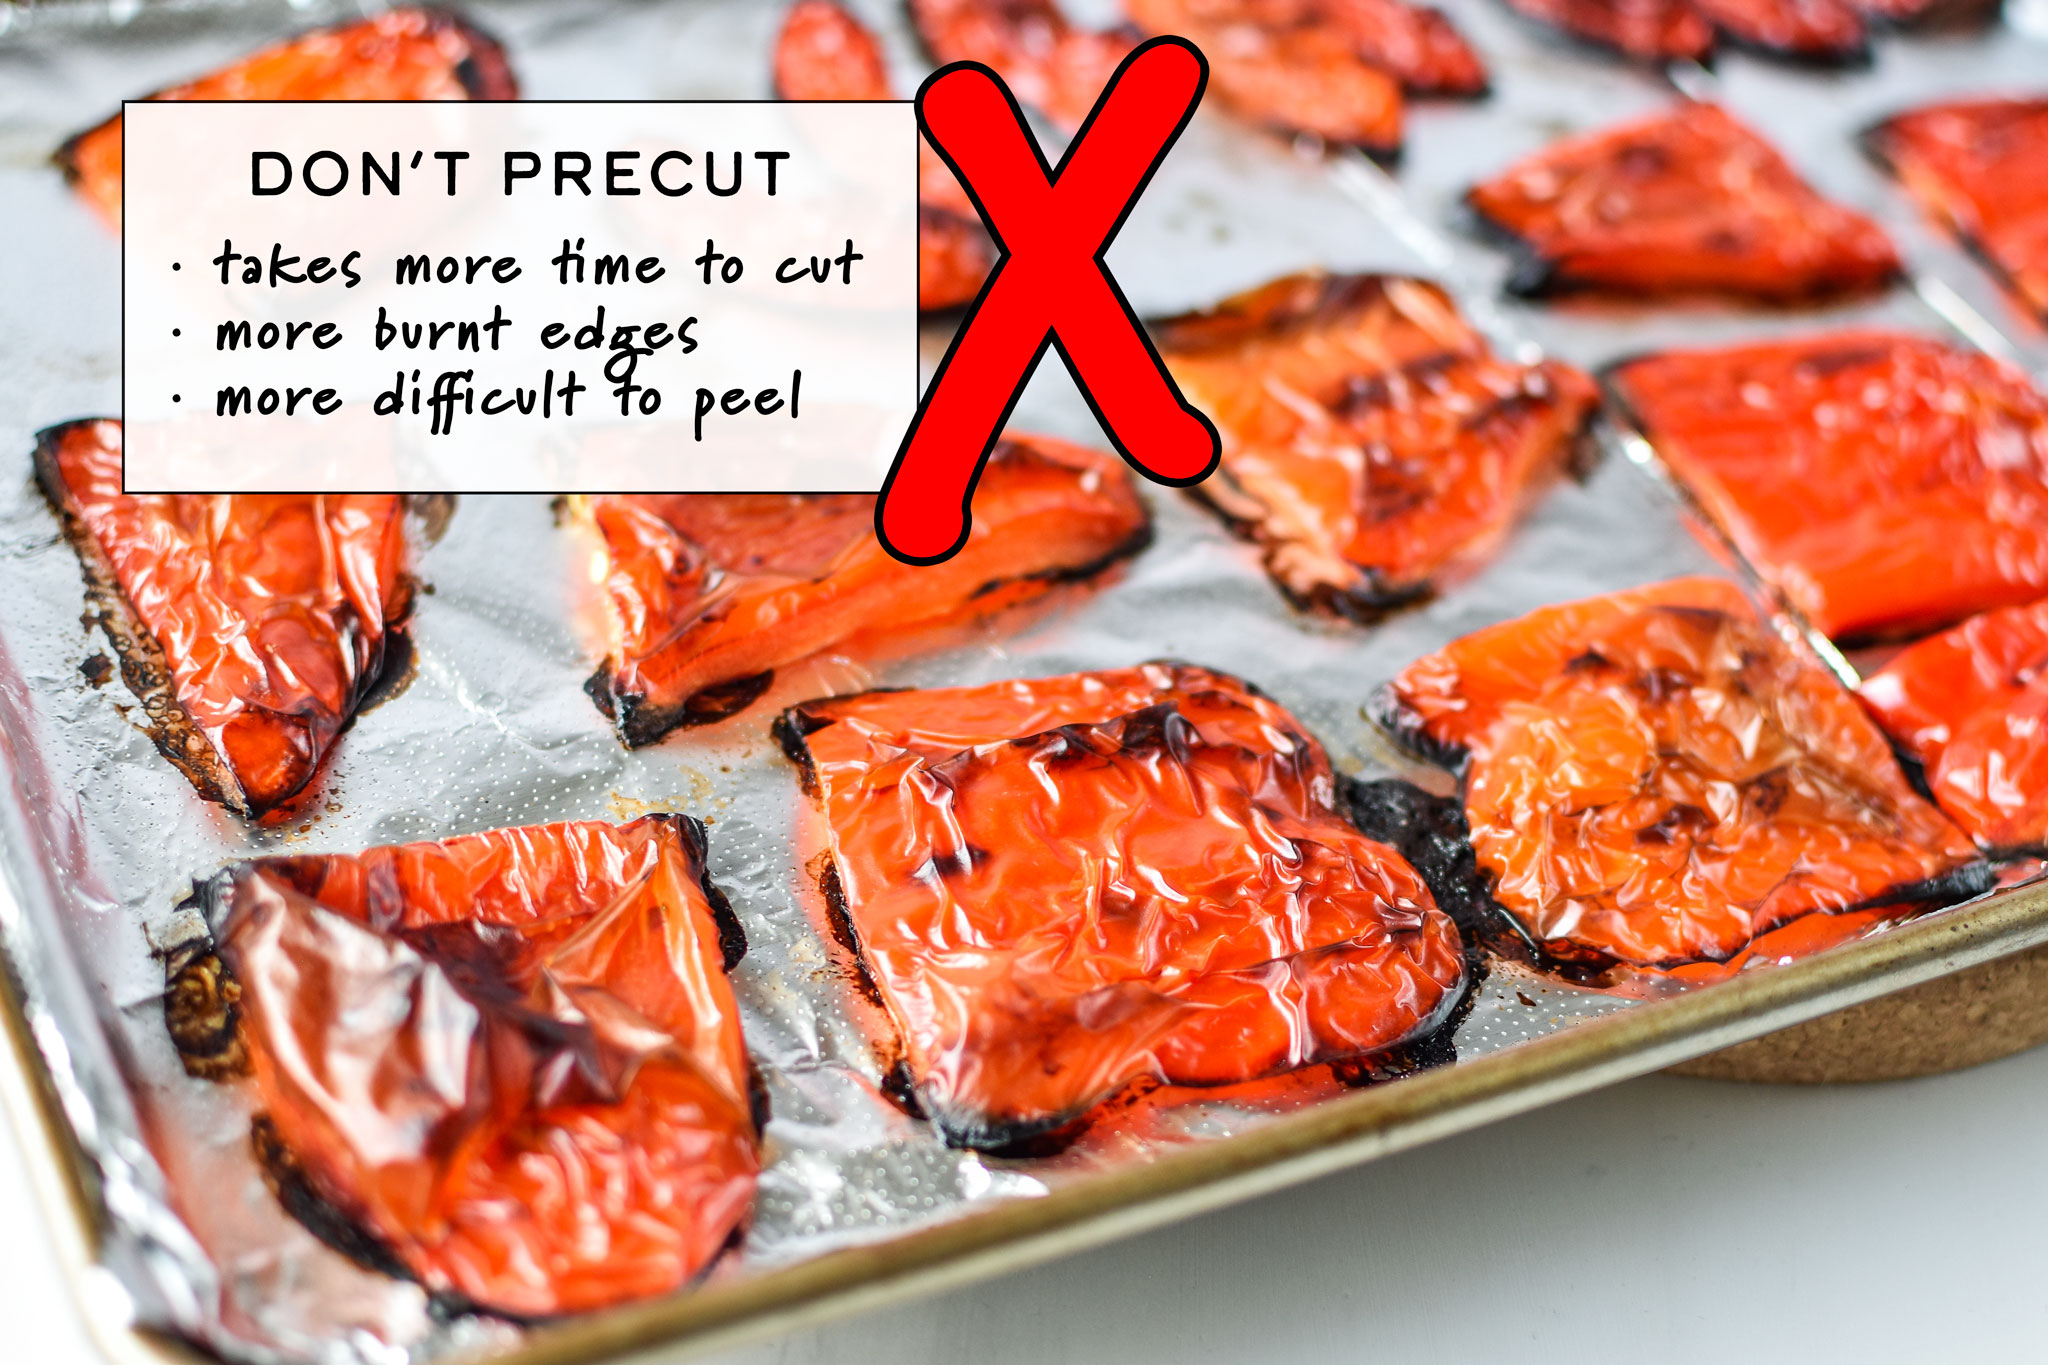 Don't precut the red bell peppers before roasting